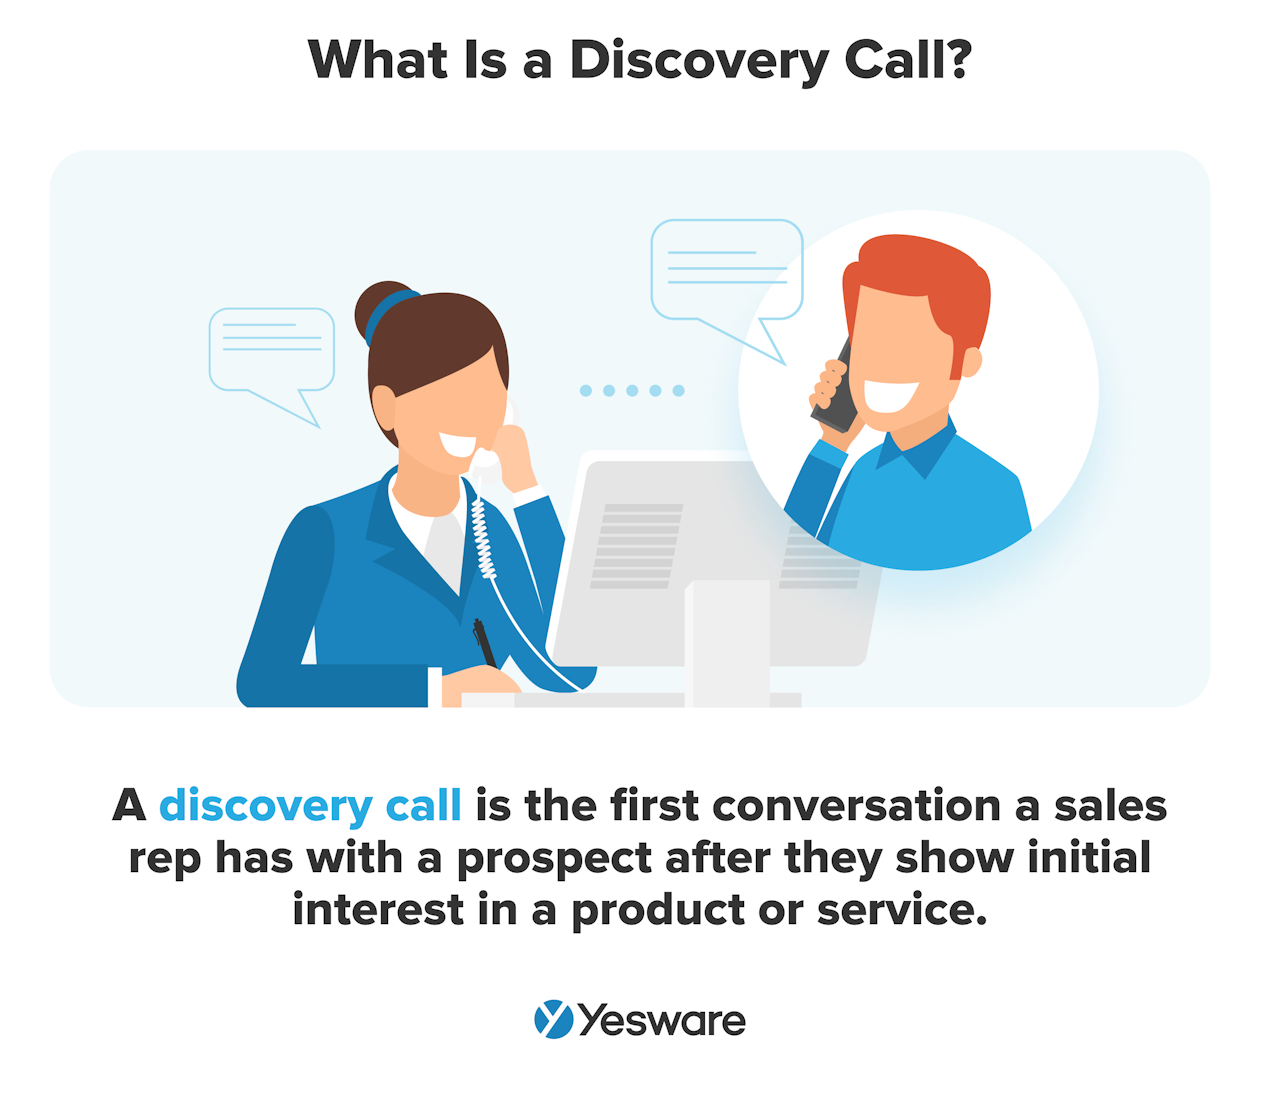 what is a discovery call?